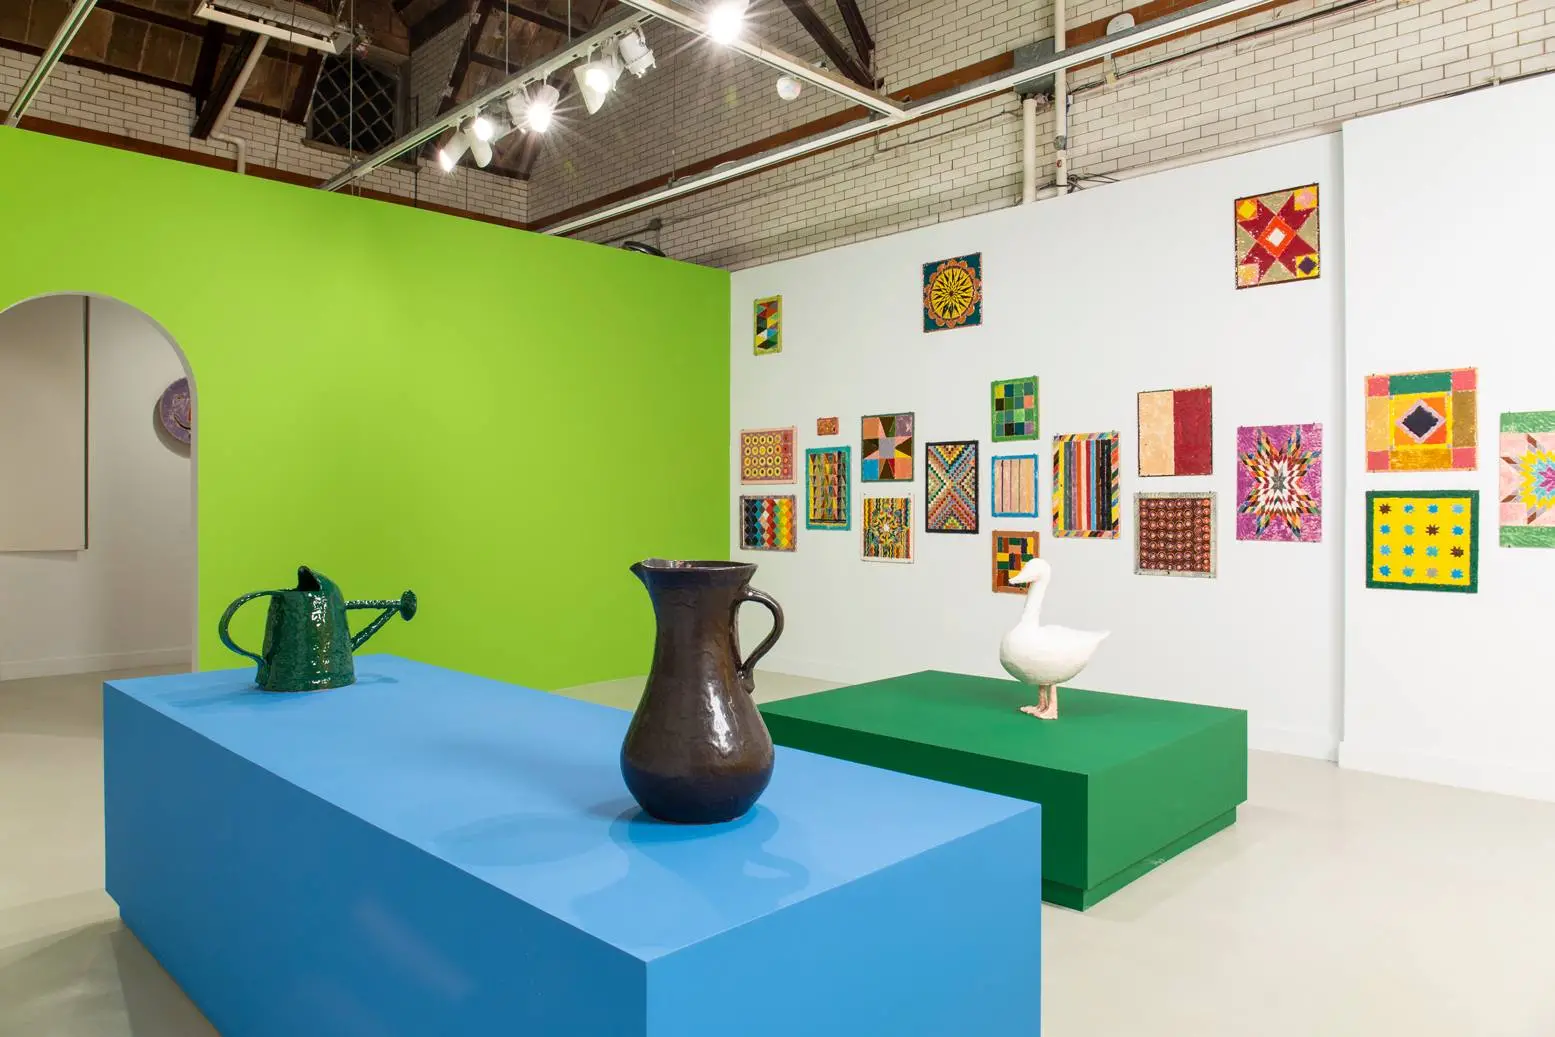 Installation view, "Polly Apfelbaum: For the Love of Una Hale," 2022, Spruance Gallery, photo: Greenhouse Media